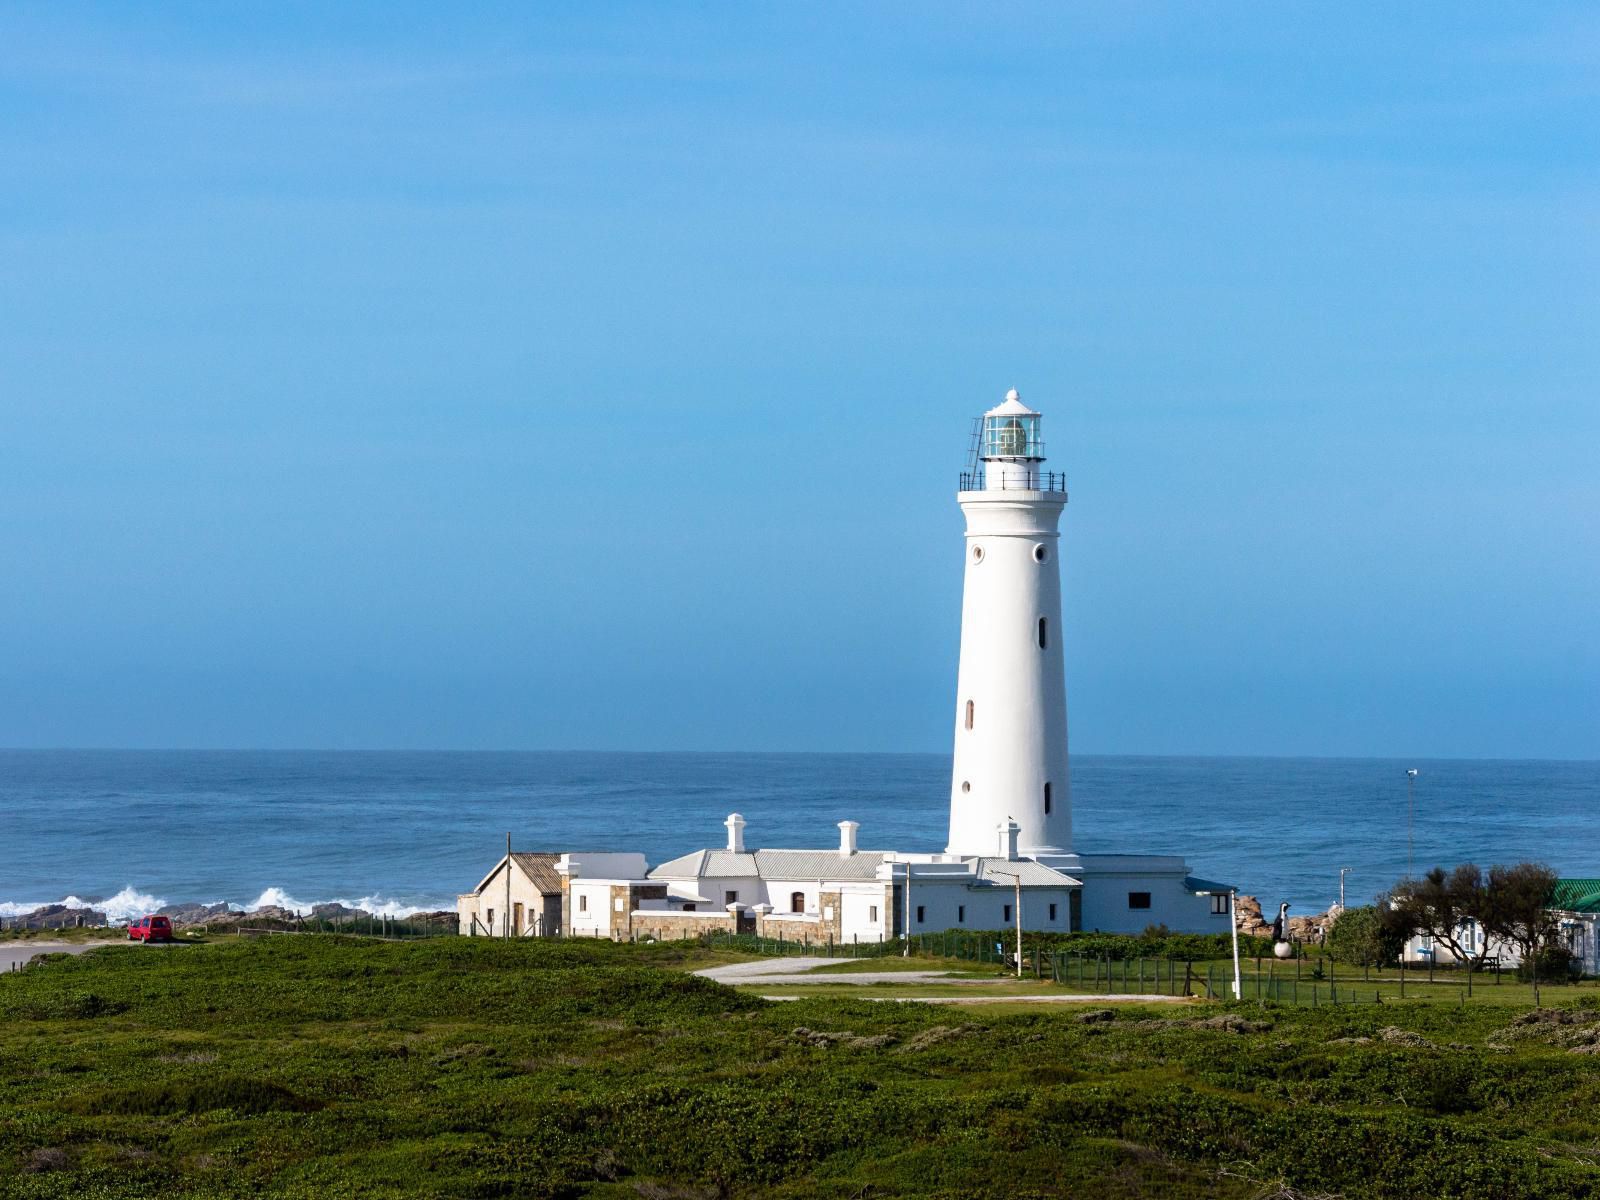 Cape St Francis Collection Cape St Francis Eastern Cape South Africa Colorful, Beach, Nature, Sand, Building, Architecture, Lighthouse, Tower